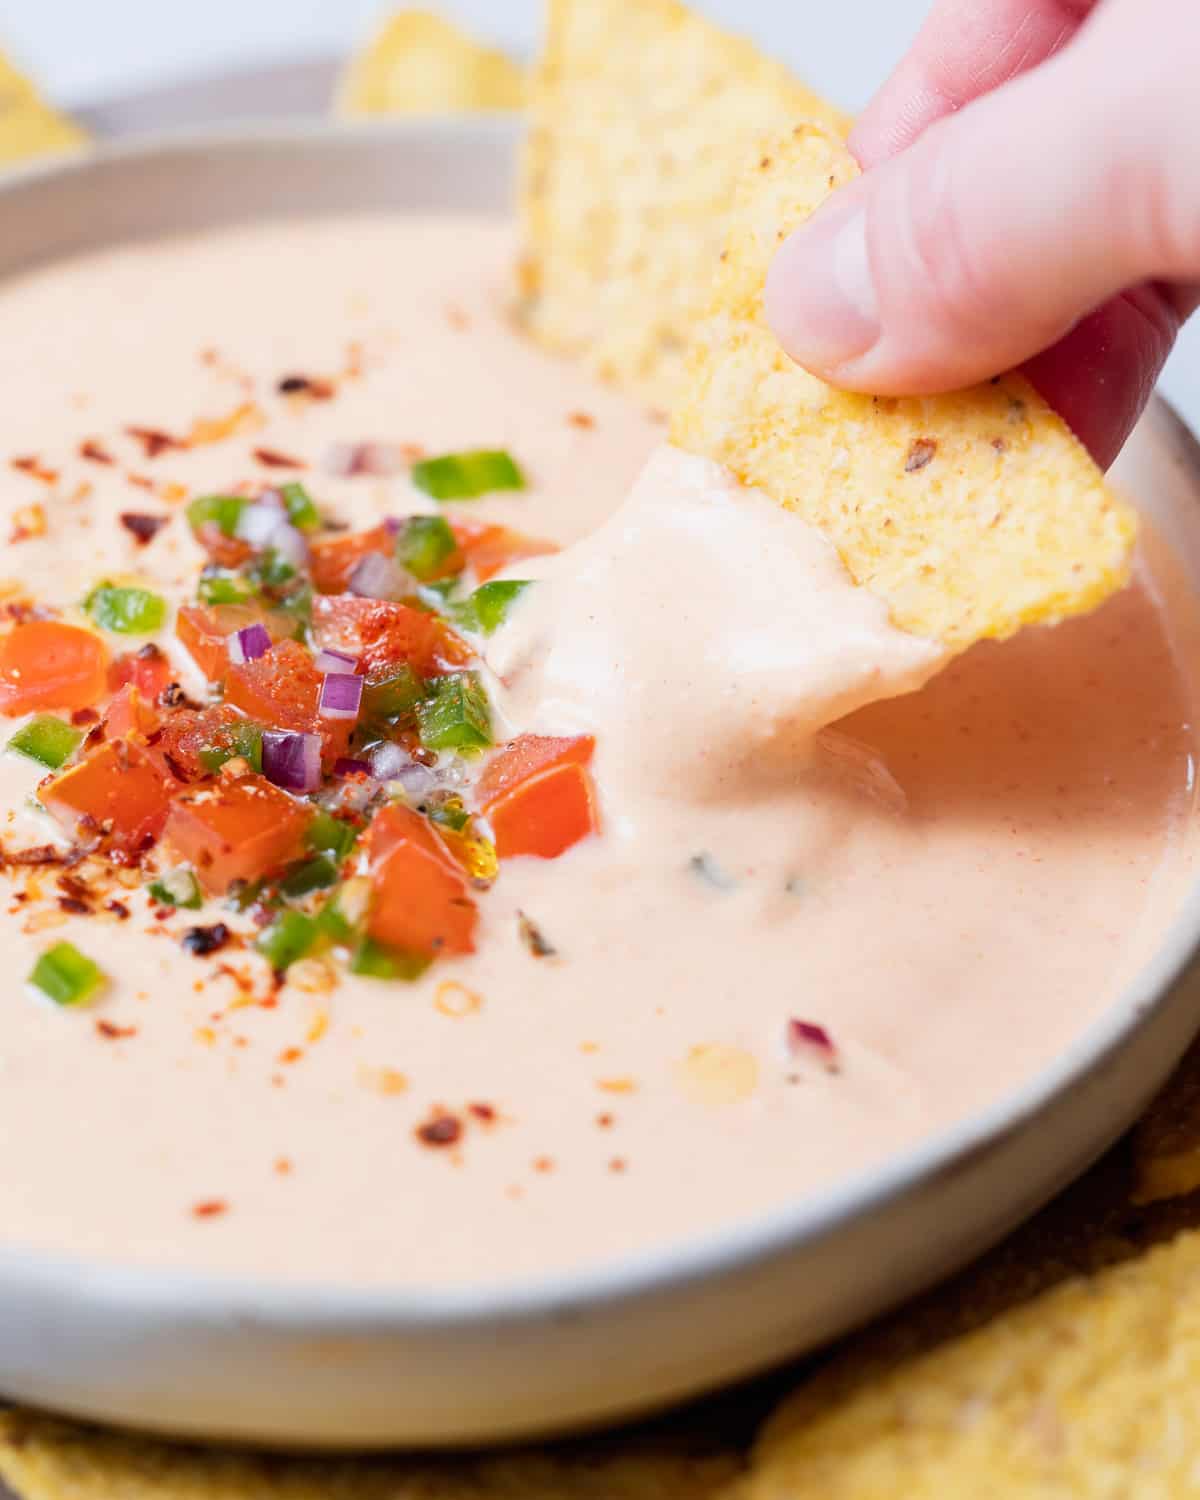 Hand dipping a chip into a cheese dip.